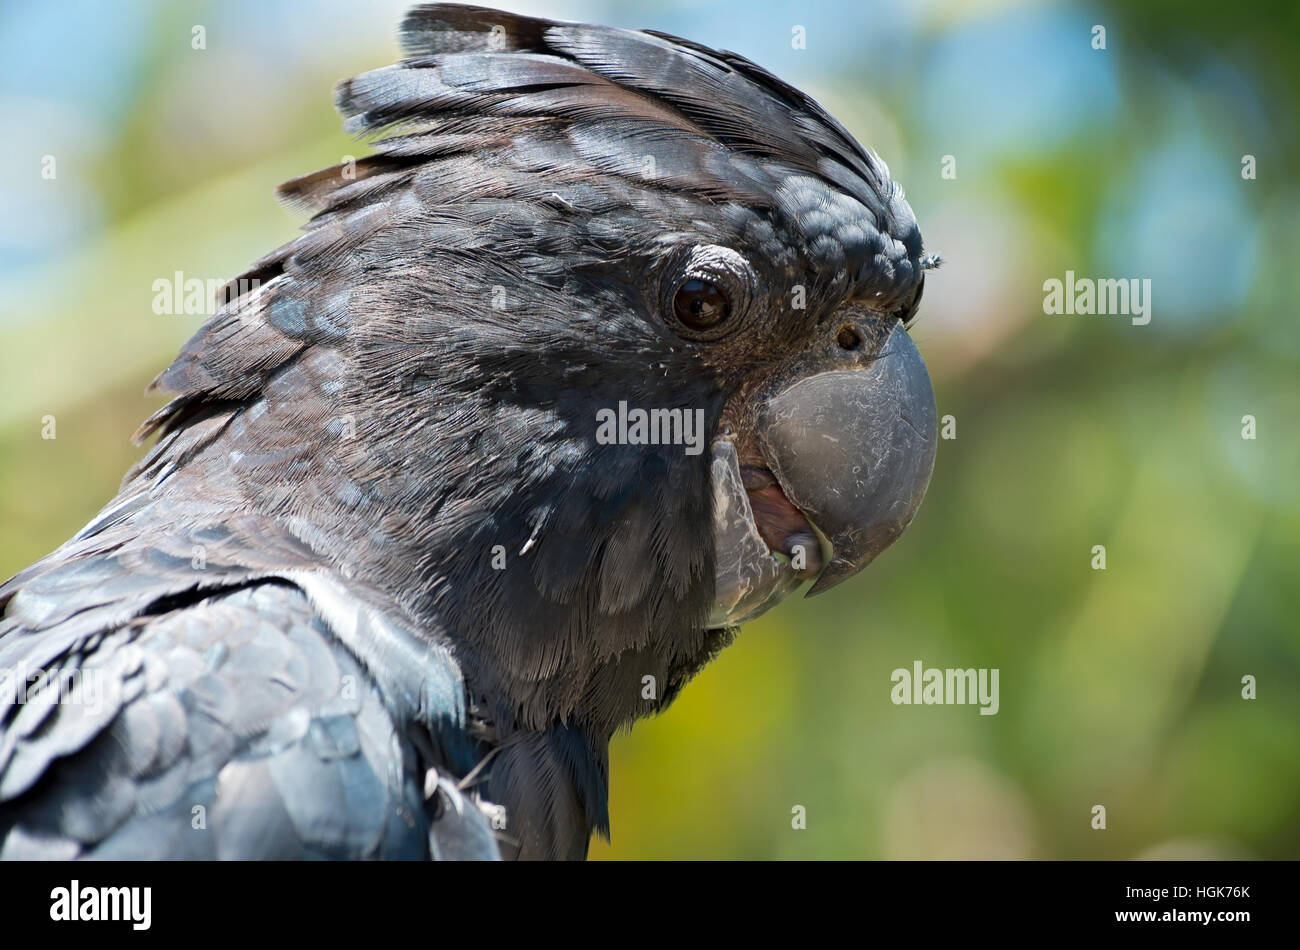 red tailed black cockatoo or calyptorhynchus banksii profile up close Stock Photo